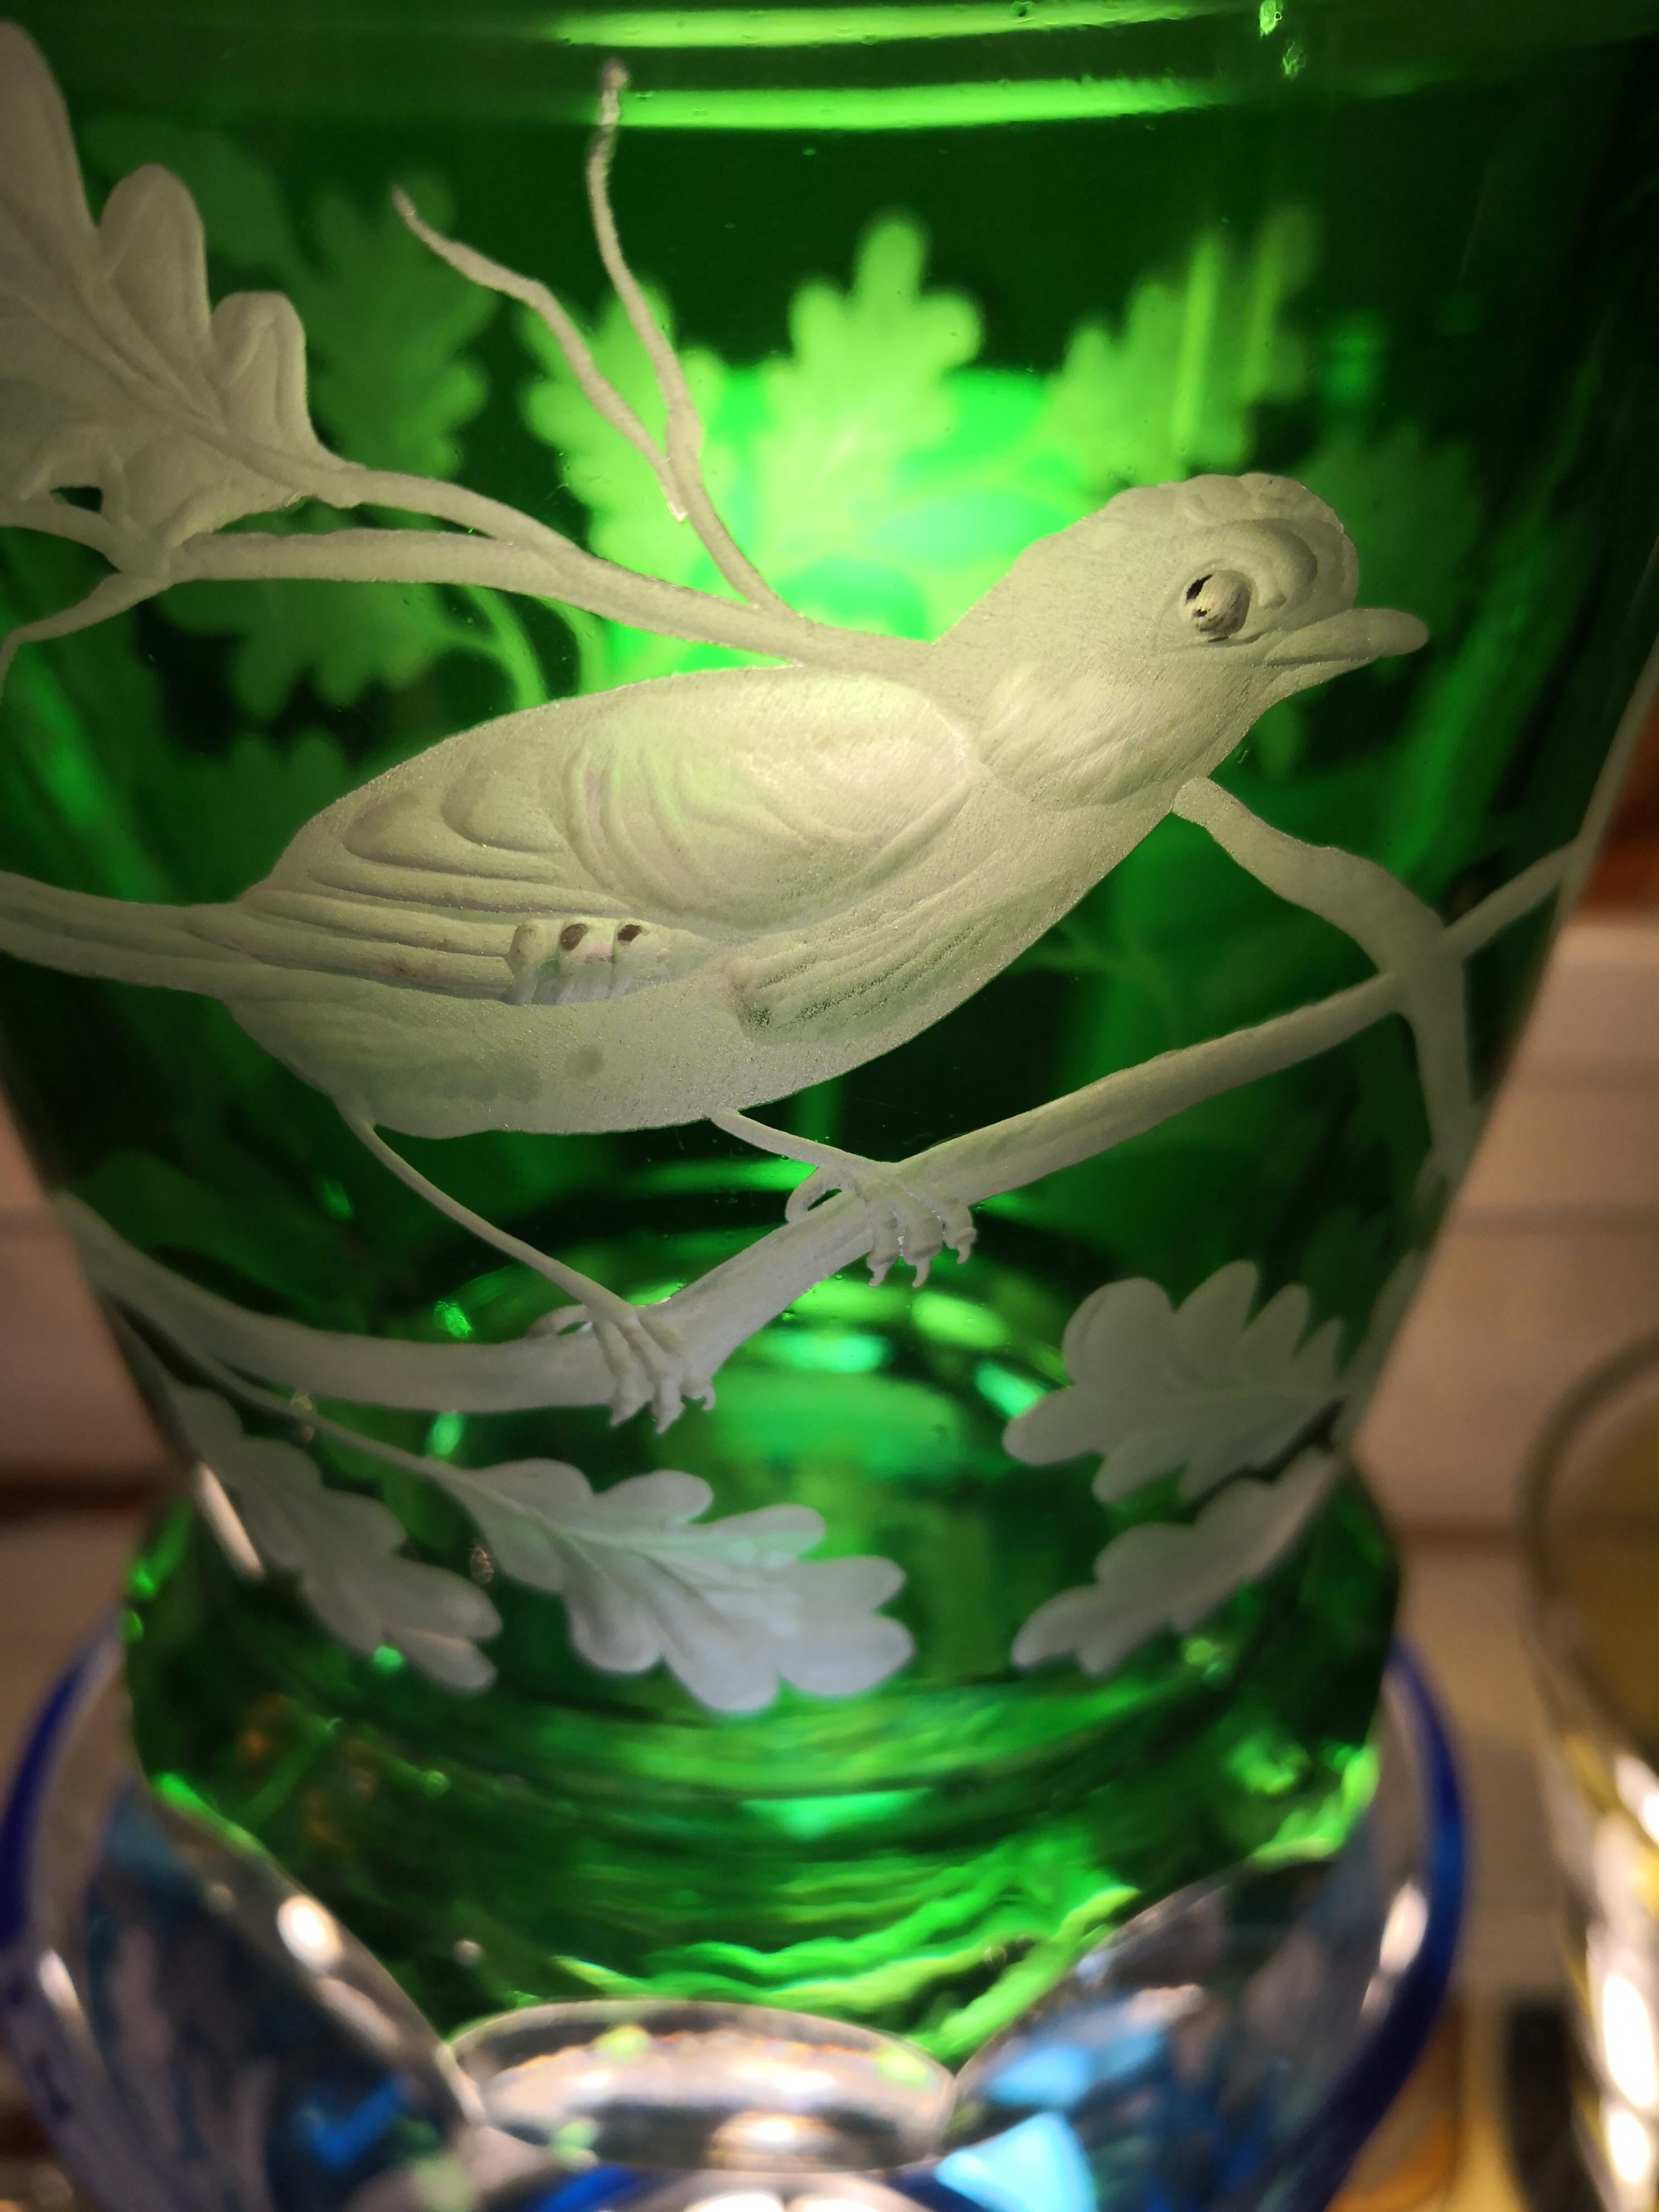 Hand blown crystal vase/laterne in green glass with birds decor all arond. The decor shows birds sitting on trees and leafs all around the glass. The decor is hands free engraved by artists and the bottom of the glass is hand carved. The glass here